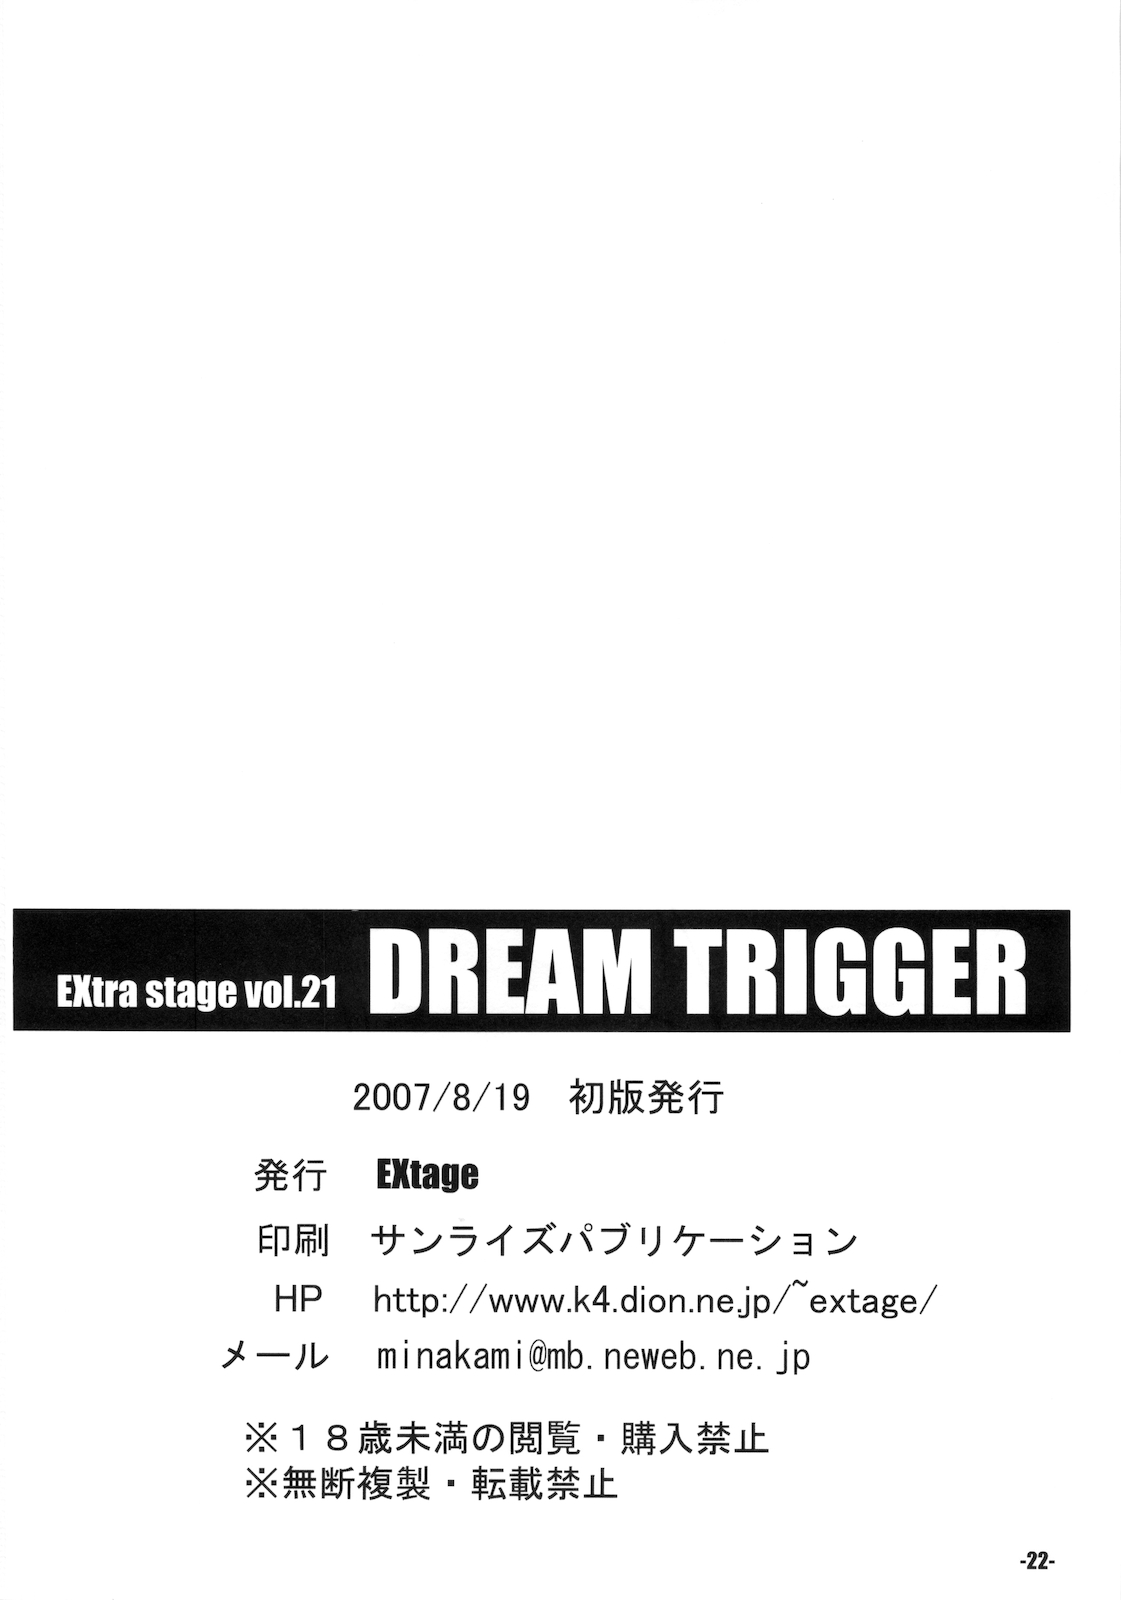 [EXtage (水上広樹)] EXtra Stage vol.21 DREAM TRIGGER (トリガーハート エグゼリカ)